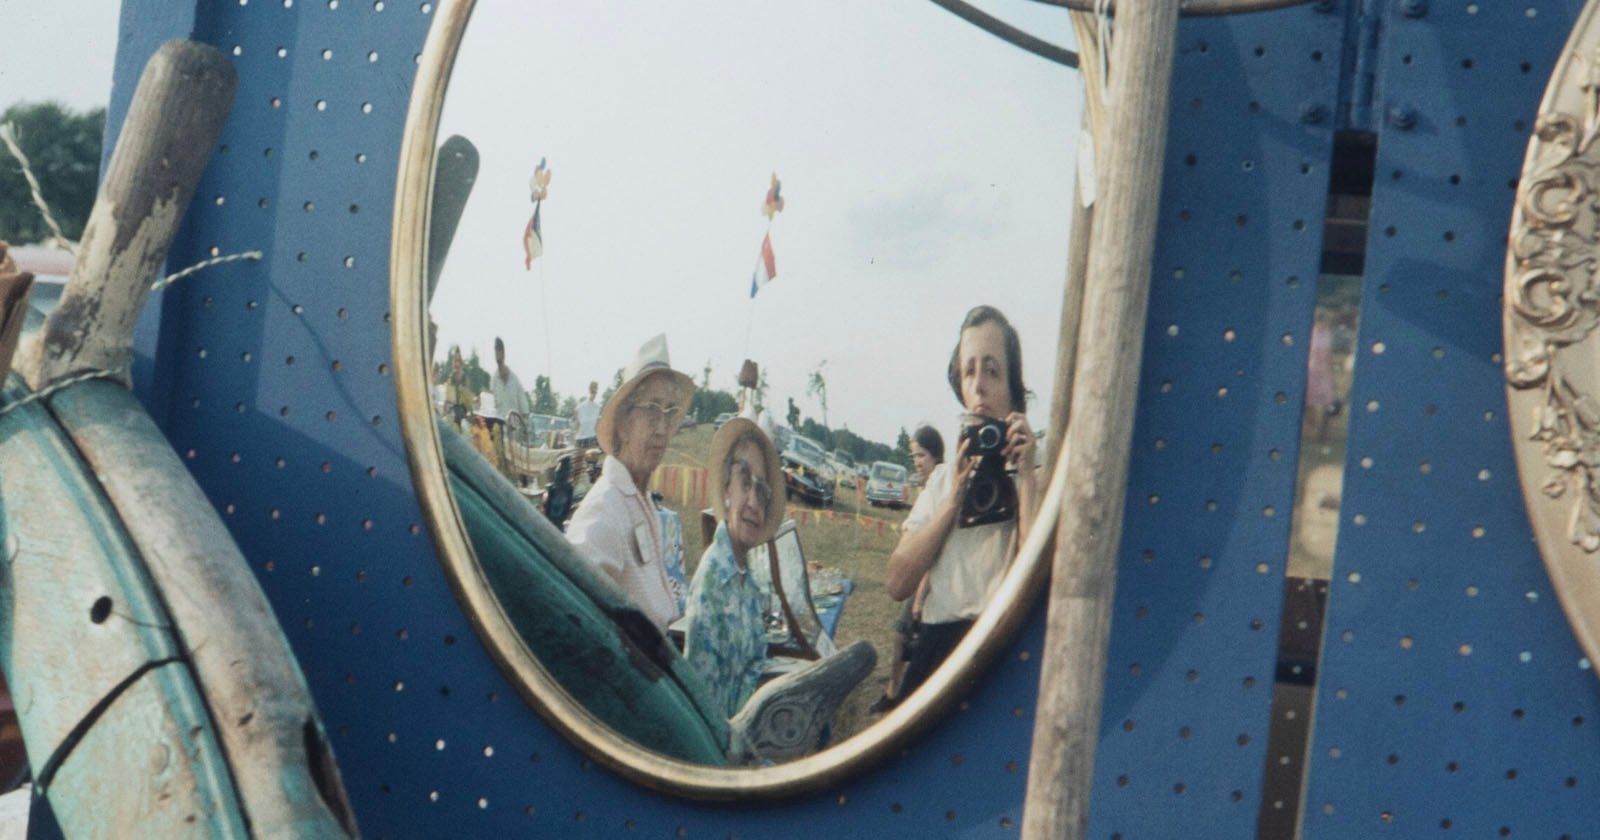 Unique Auction Is First to Feature Prints Made By Vivian Maier Herself